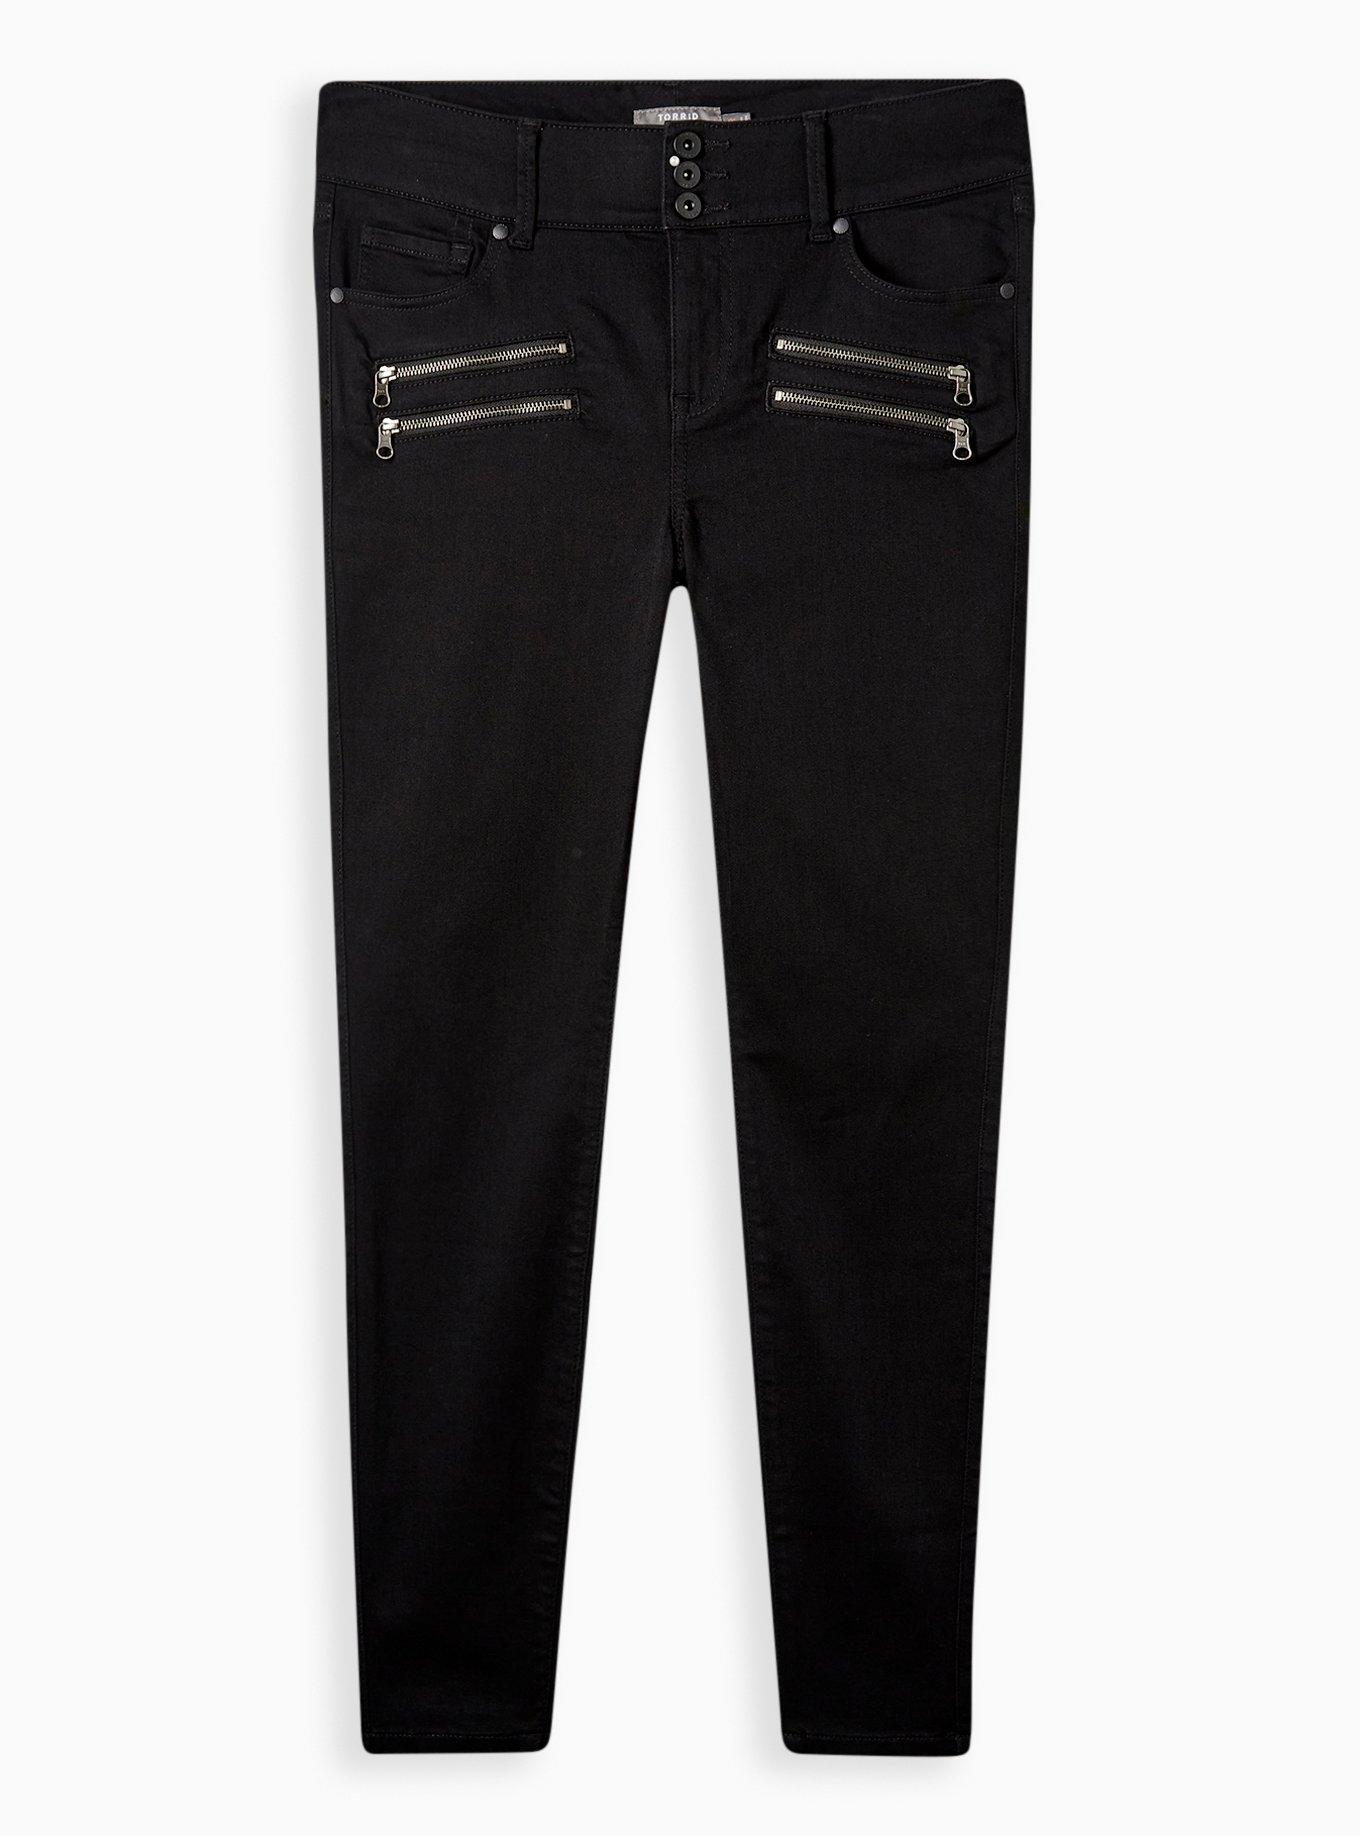 Shop Solid Ponte Jeggings with Two-Zippered Pockets Online